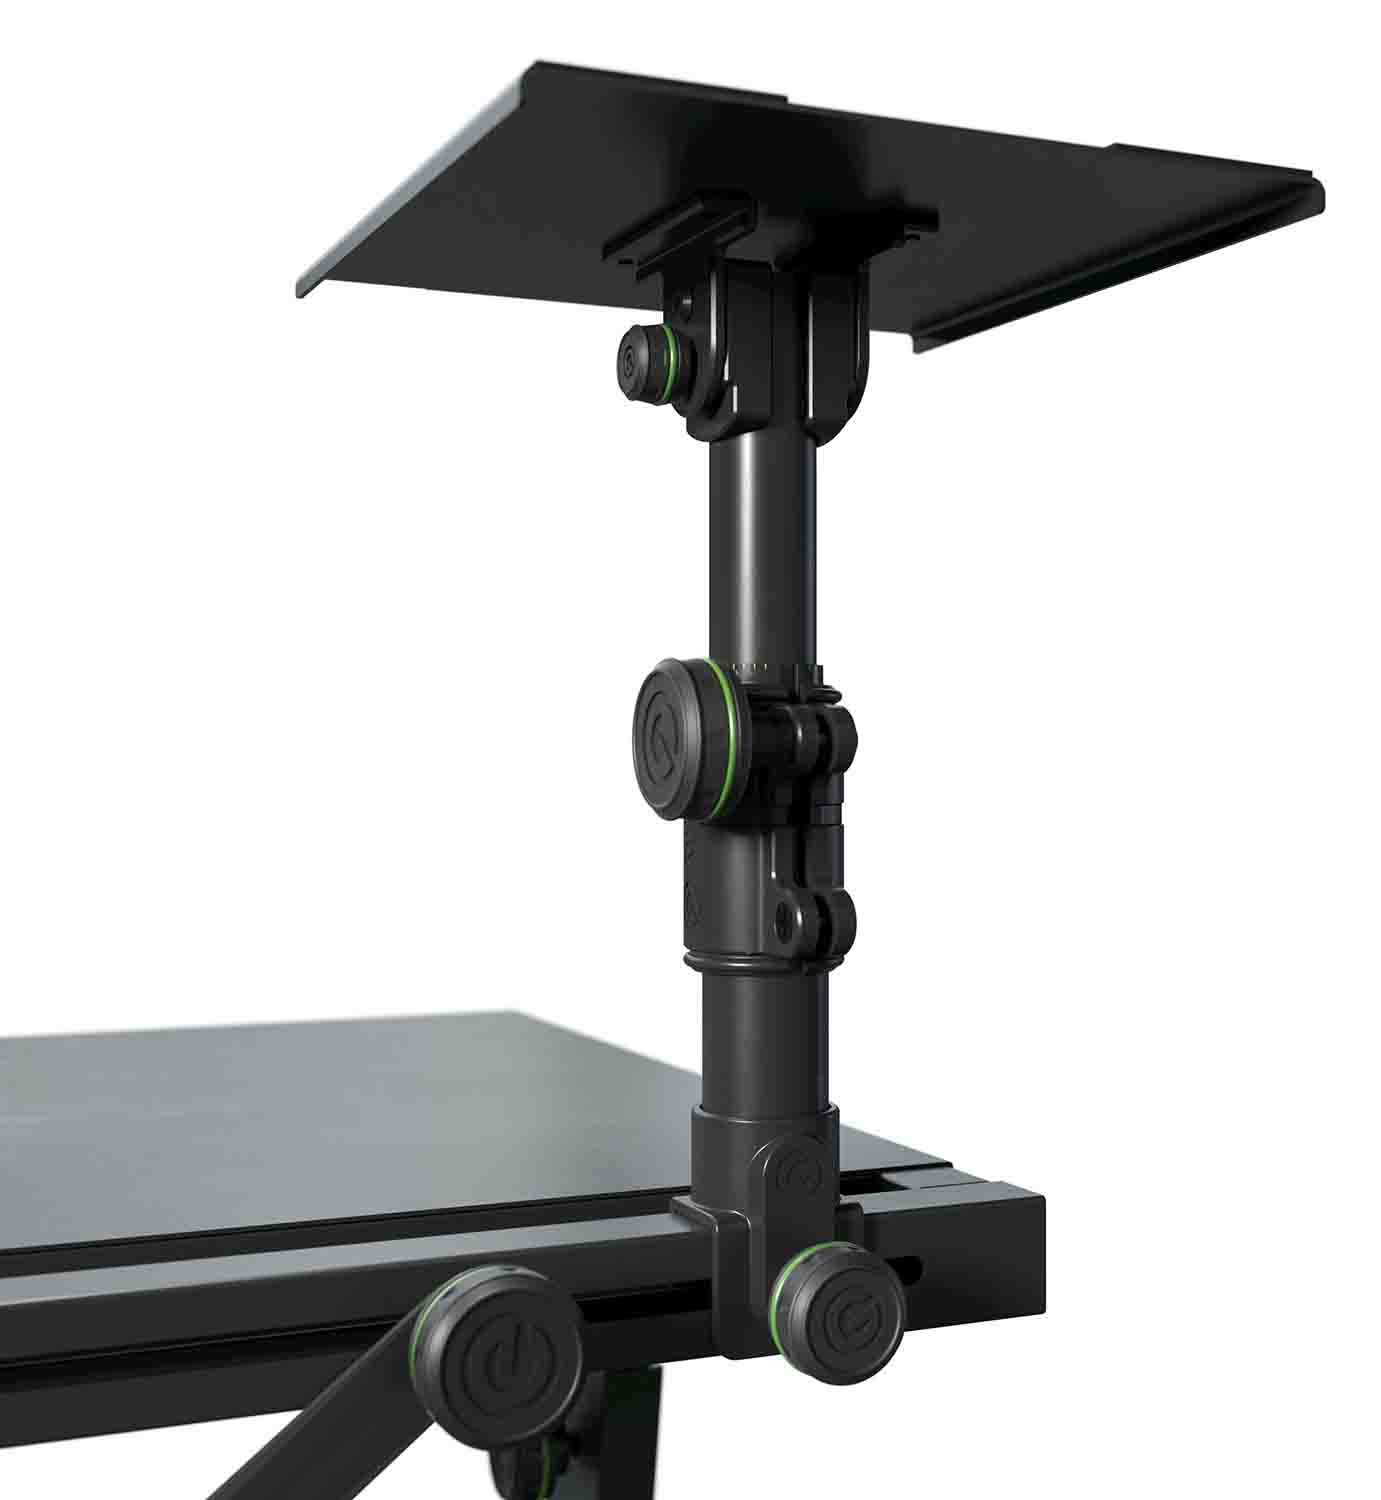 B-Stock: Gravity FDJT 01 DJ Desk with Adjustable Loudspeaker and Laptop Trays by GRAVITY STANDS